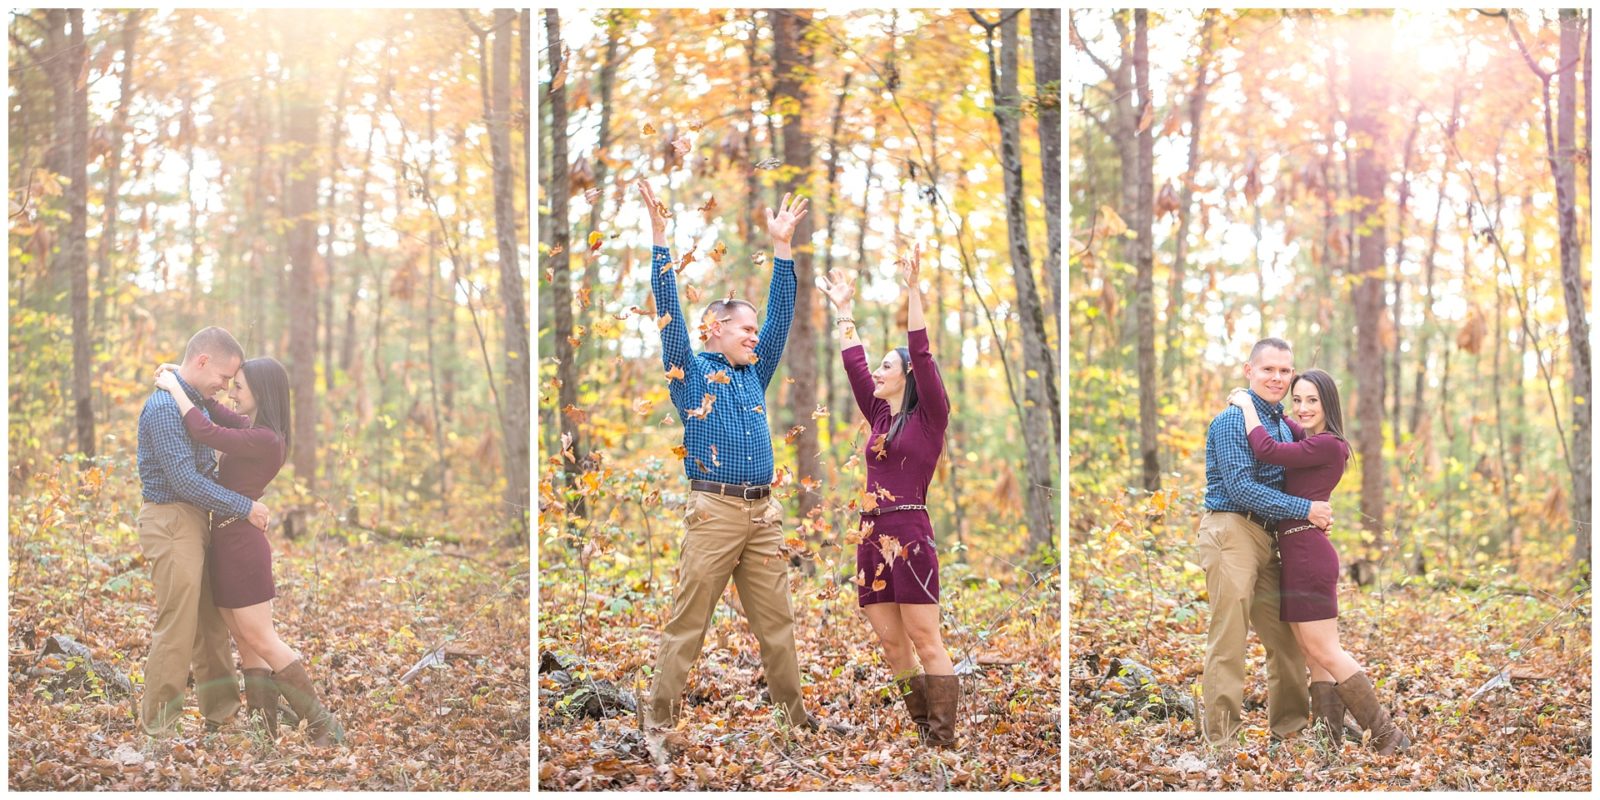 Stunning outdoor fall Red River Gorge engagement session where we visited Mill Creek Lake, Princess Arch and Chimney Top Rock in Kentucky. Photo by Kevin and Anna Photography www.kevinandannaweddings.com